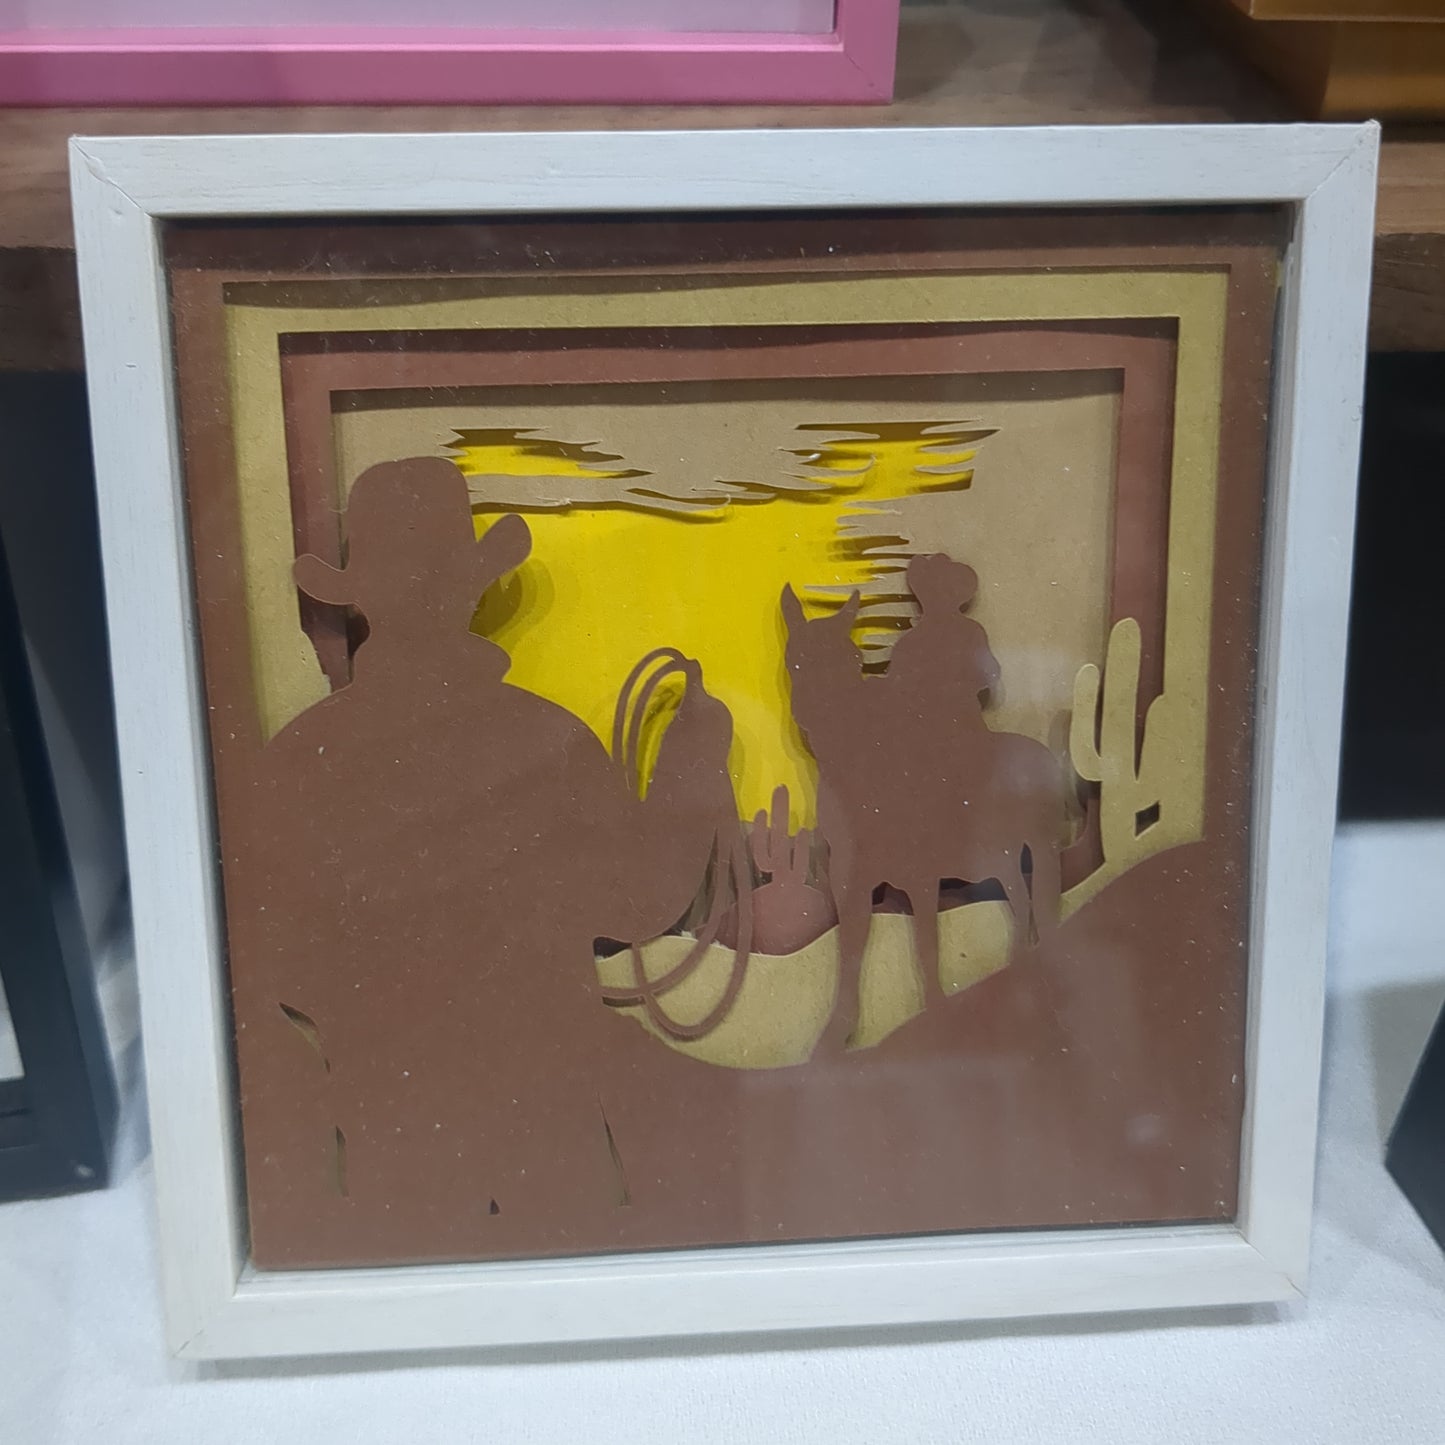 5 1/2 x 5 1/2” white shadow box with paper cut cowboy and dessert scene